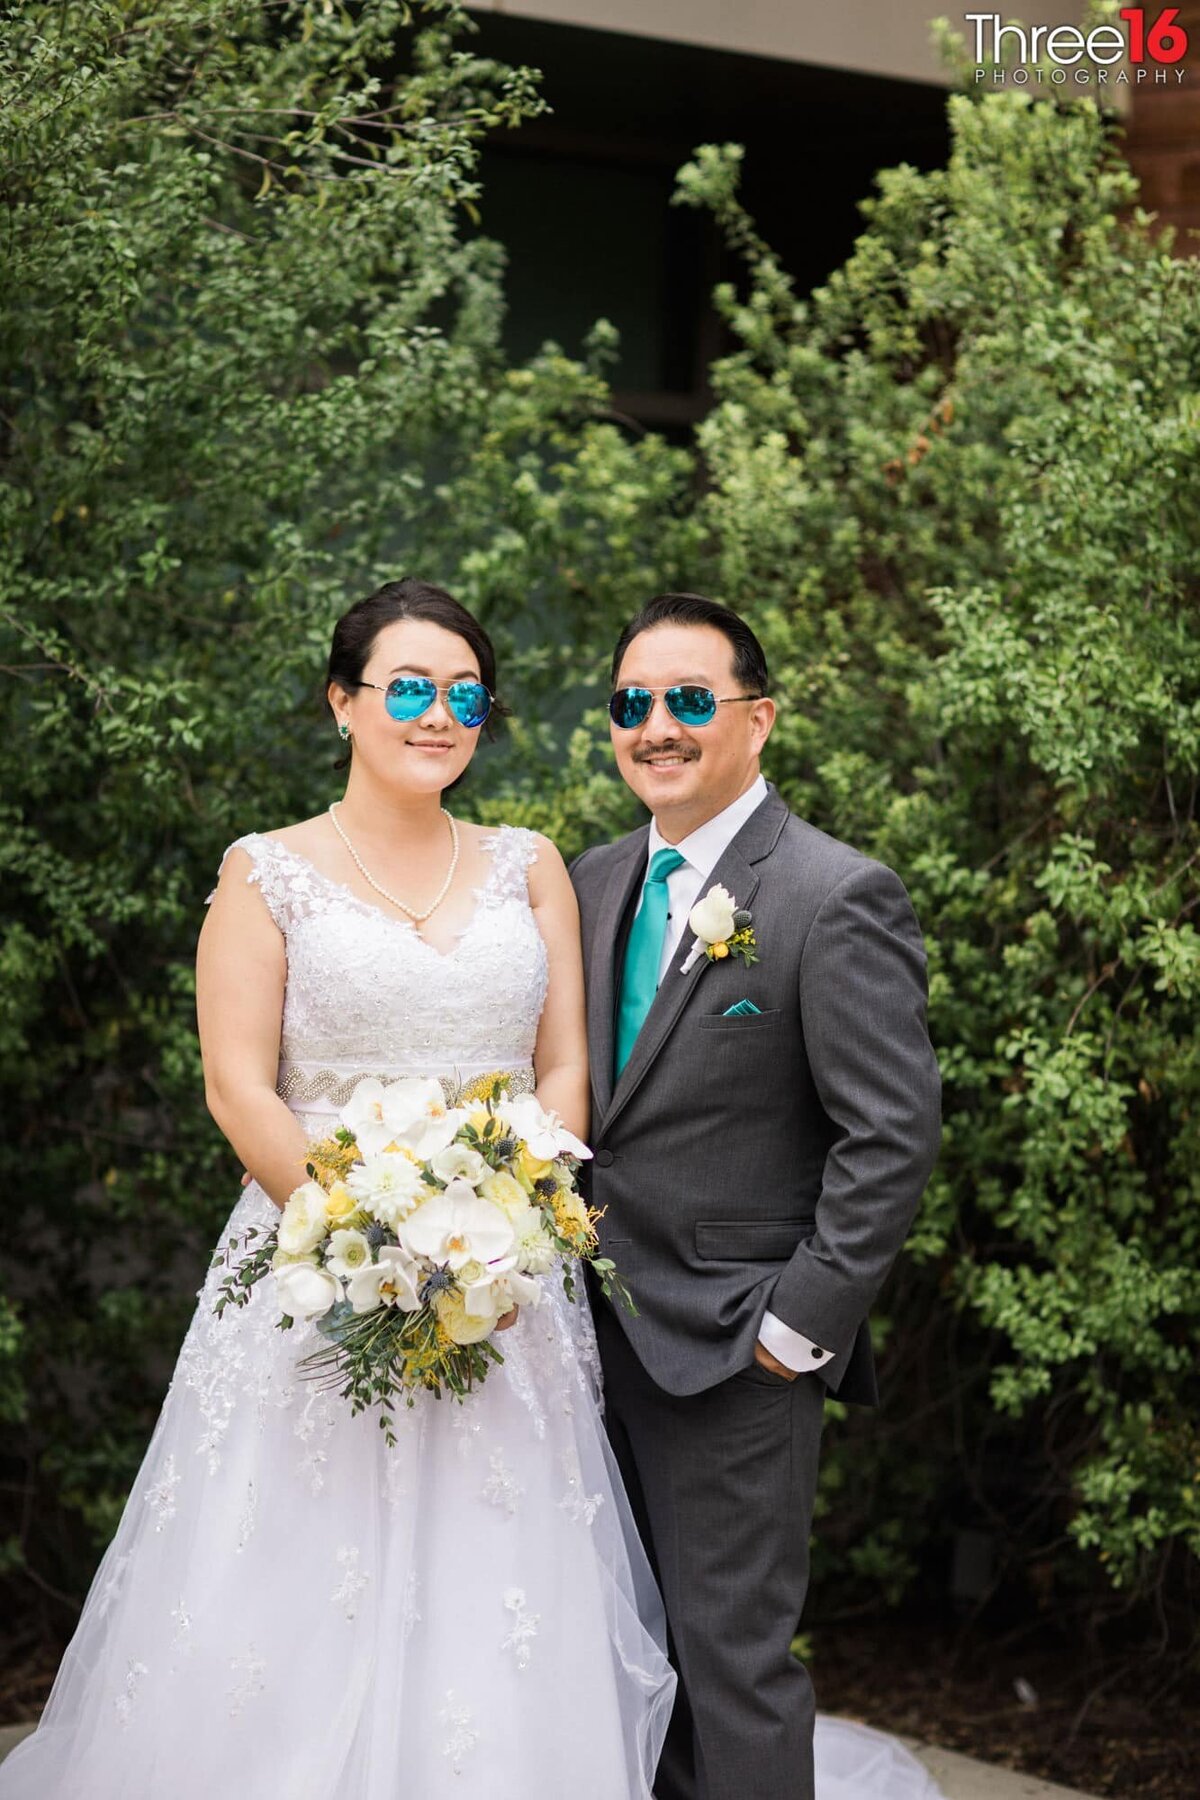 Bride and Groom pose together wearing matching sunglasses